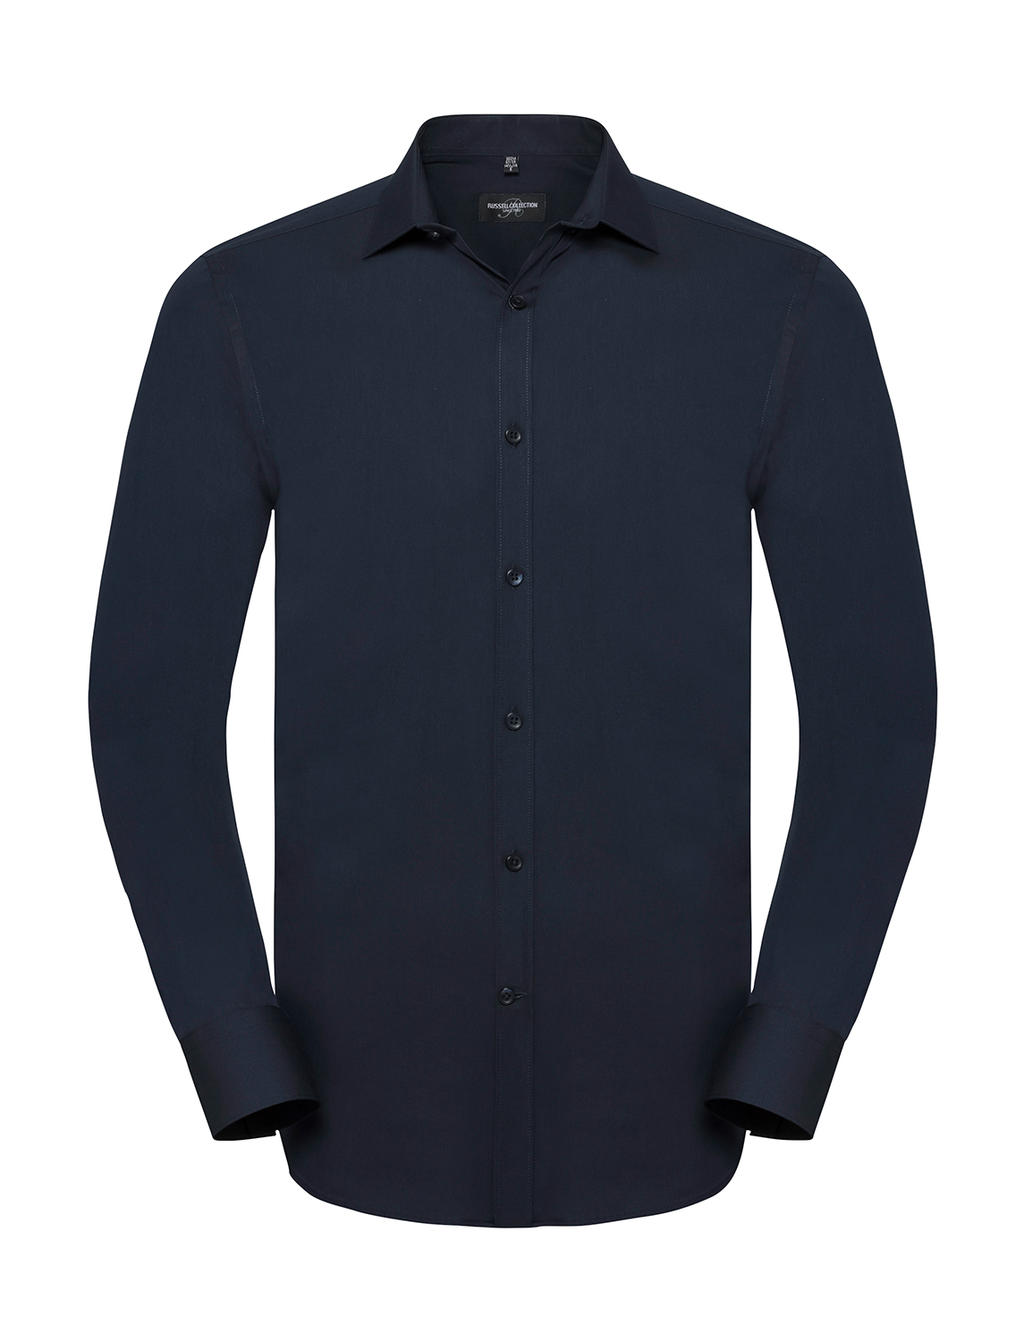  Mens LS Ultimate Stretch Shirt in Farbe Bright Navy